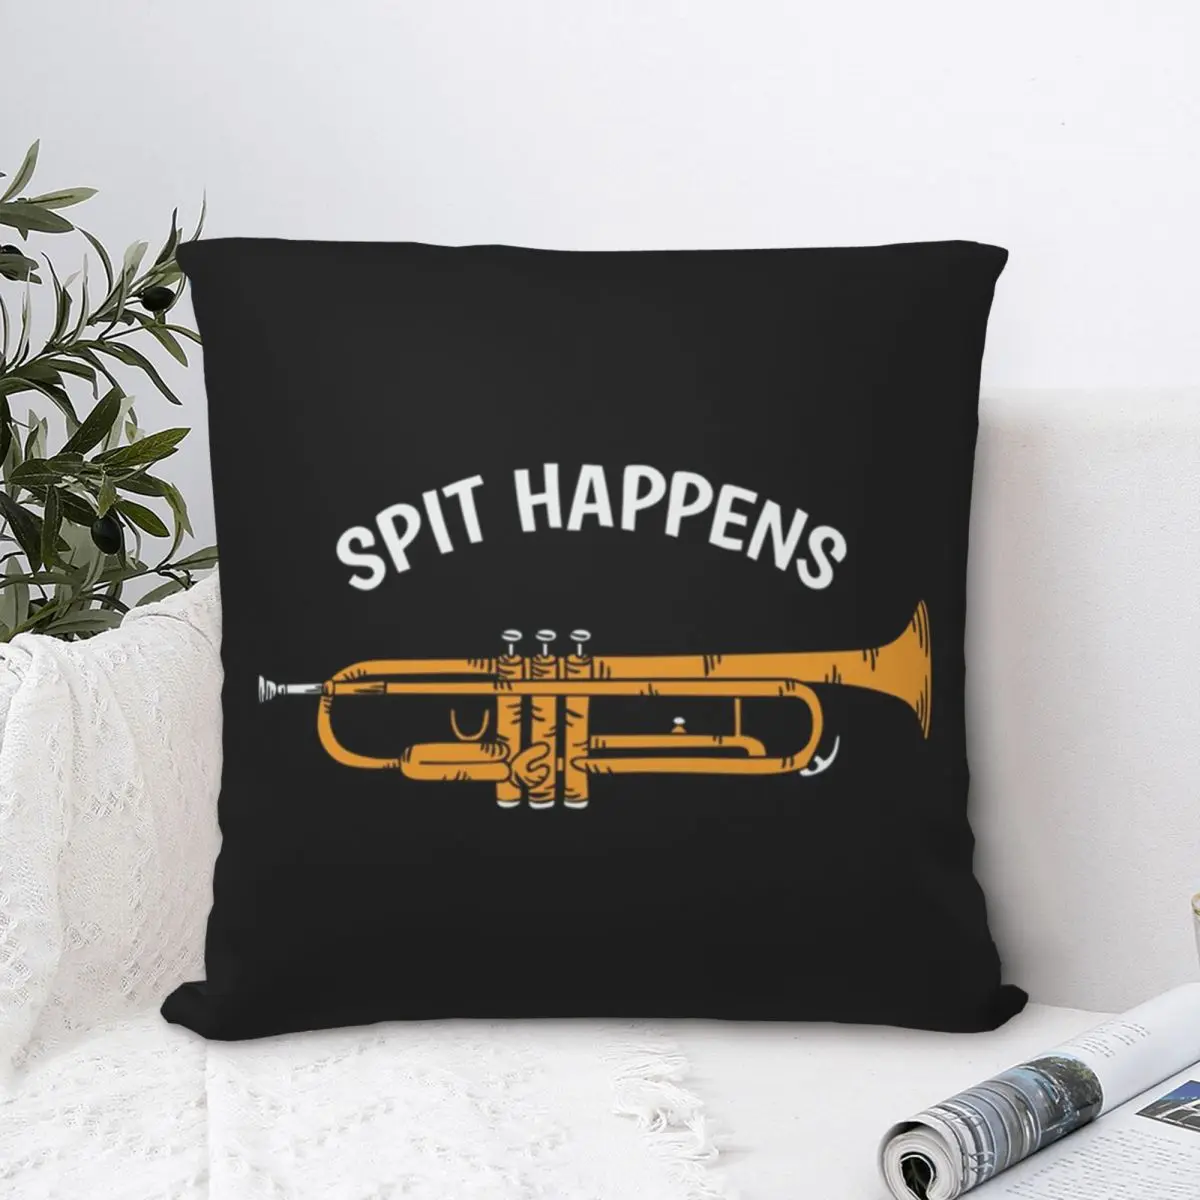 Spit Happens Musical Instrument Square Pillowcase Polyester Pillow Cover Velvet Cushion Zip Decorative Comfort Throw Pillow Home spit happens musical instrument square pillowcase polyester pillow cover velvet cushion zip decorative comfort throw pillow home